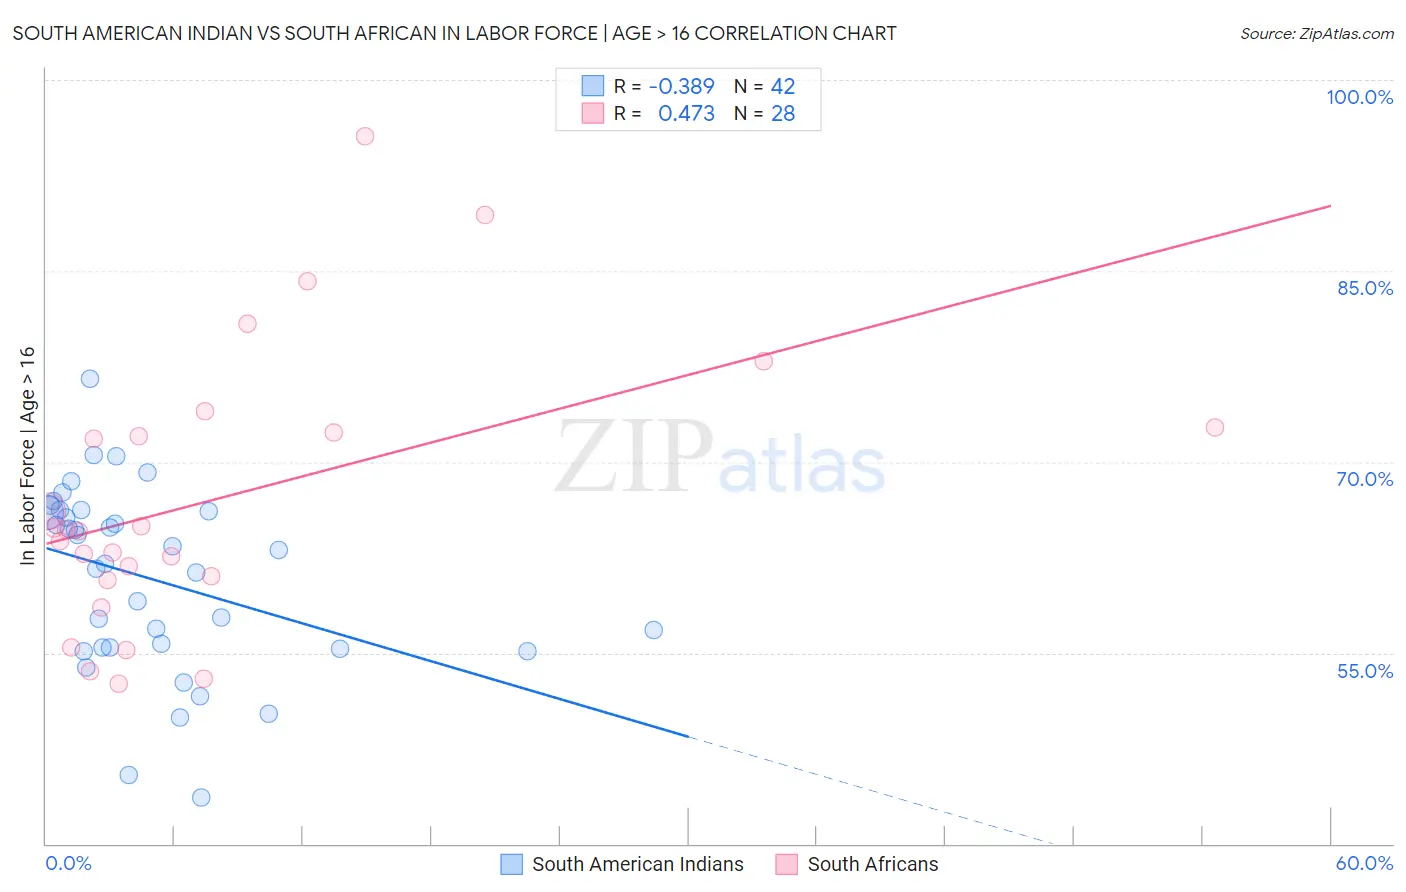 South American Indian vs South African In Labor Force | Age > 16